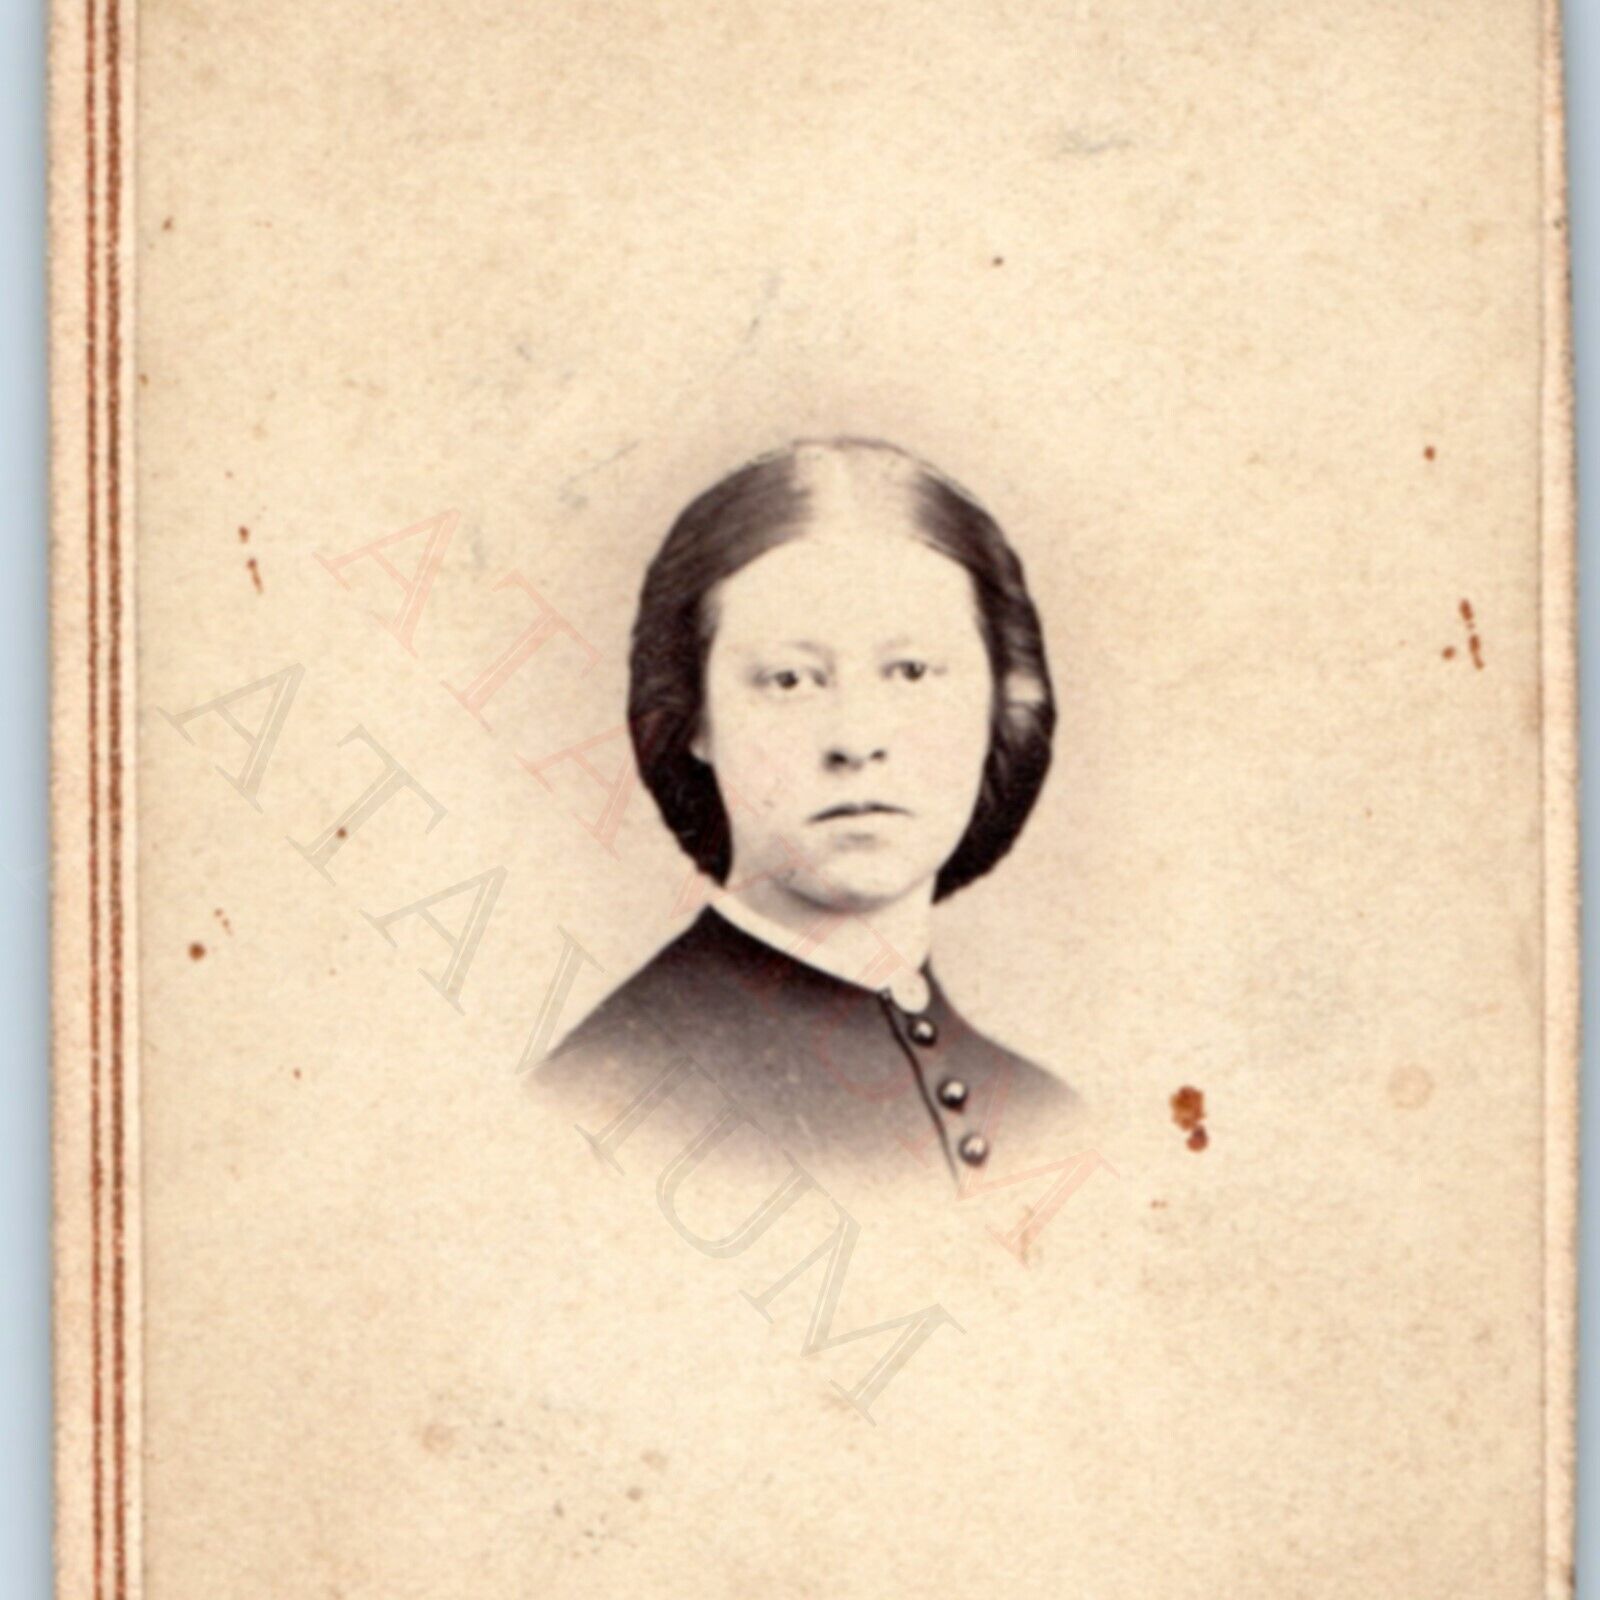 c1860s Lovely Lady Headshot Portrait Woman CDV Real Photo Old Hair Style H37